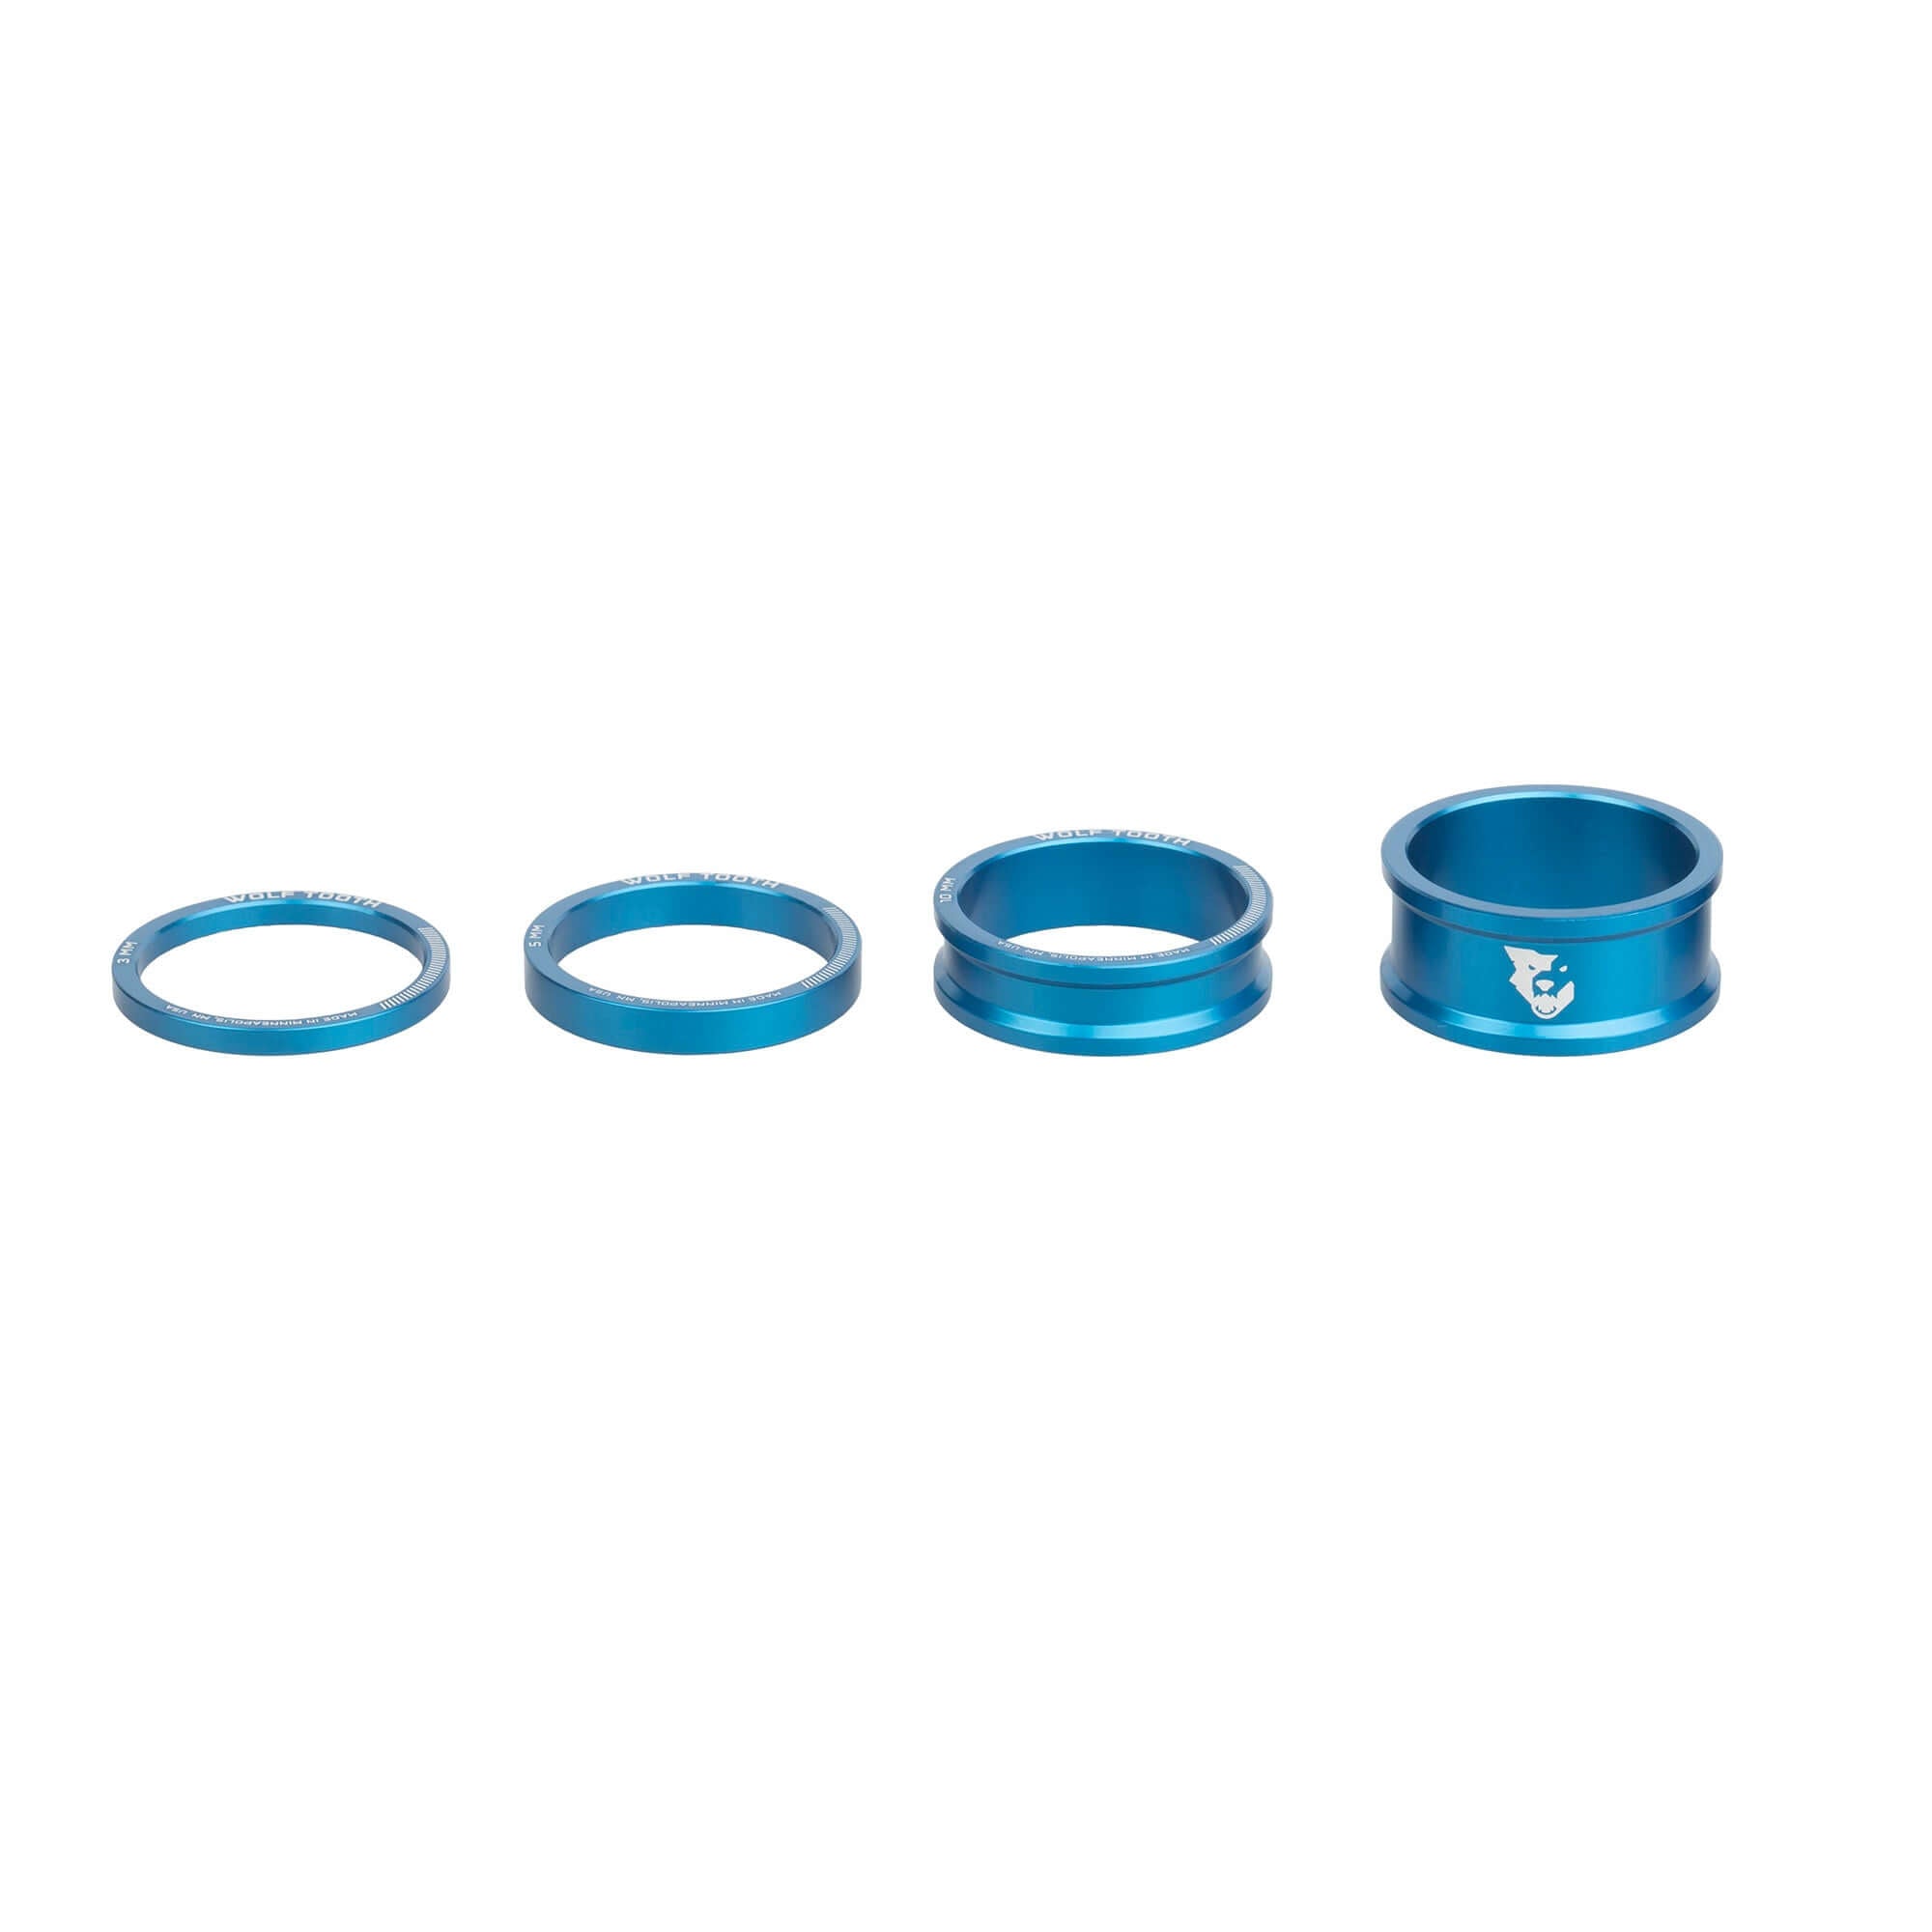 Wolf Tooth Precision Headset Spacers Kit Set - 4pc pack